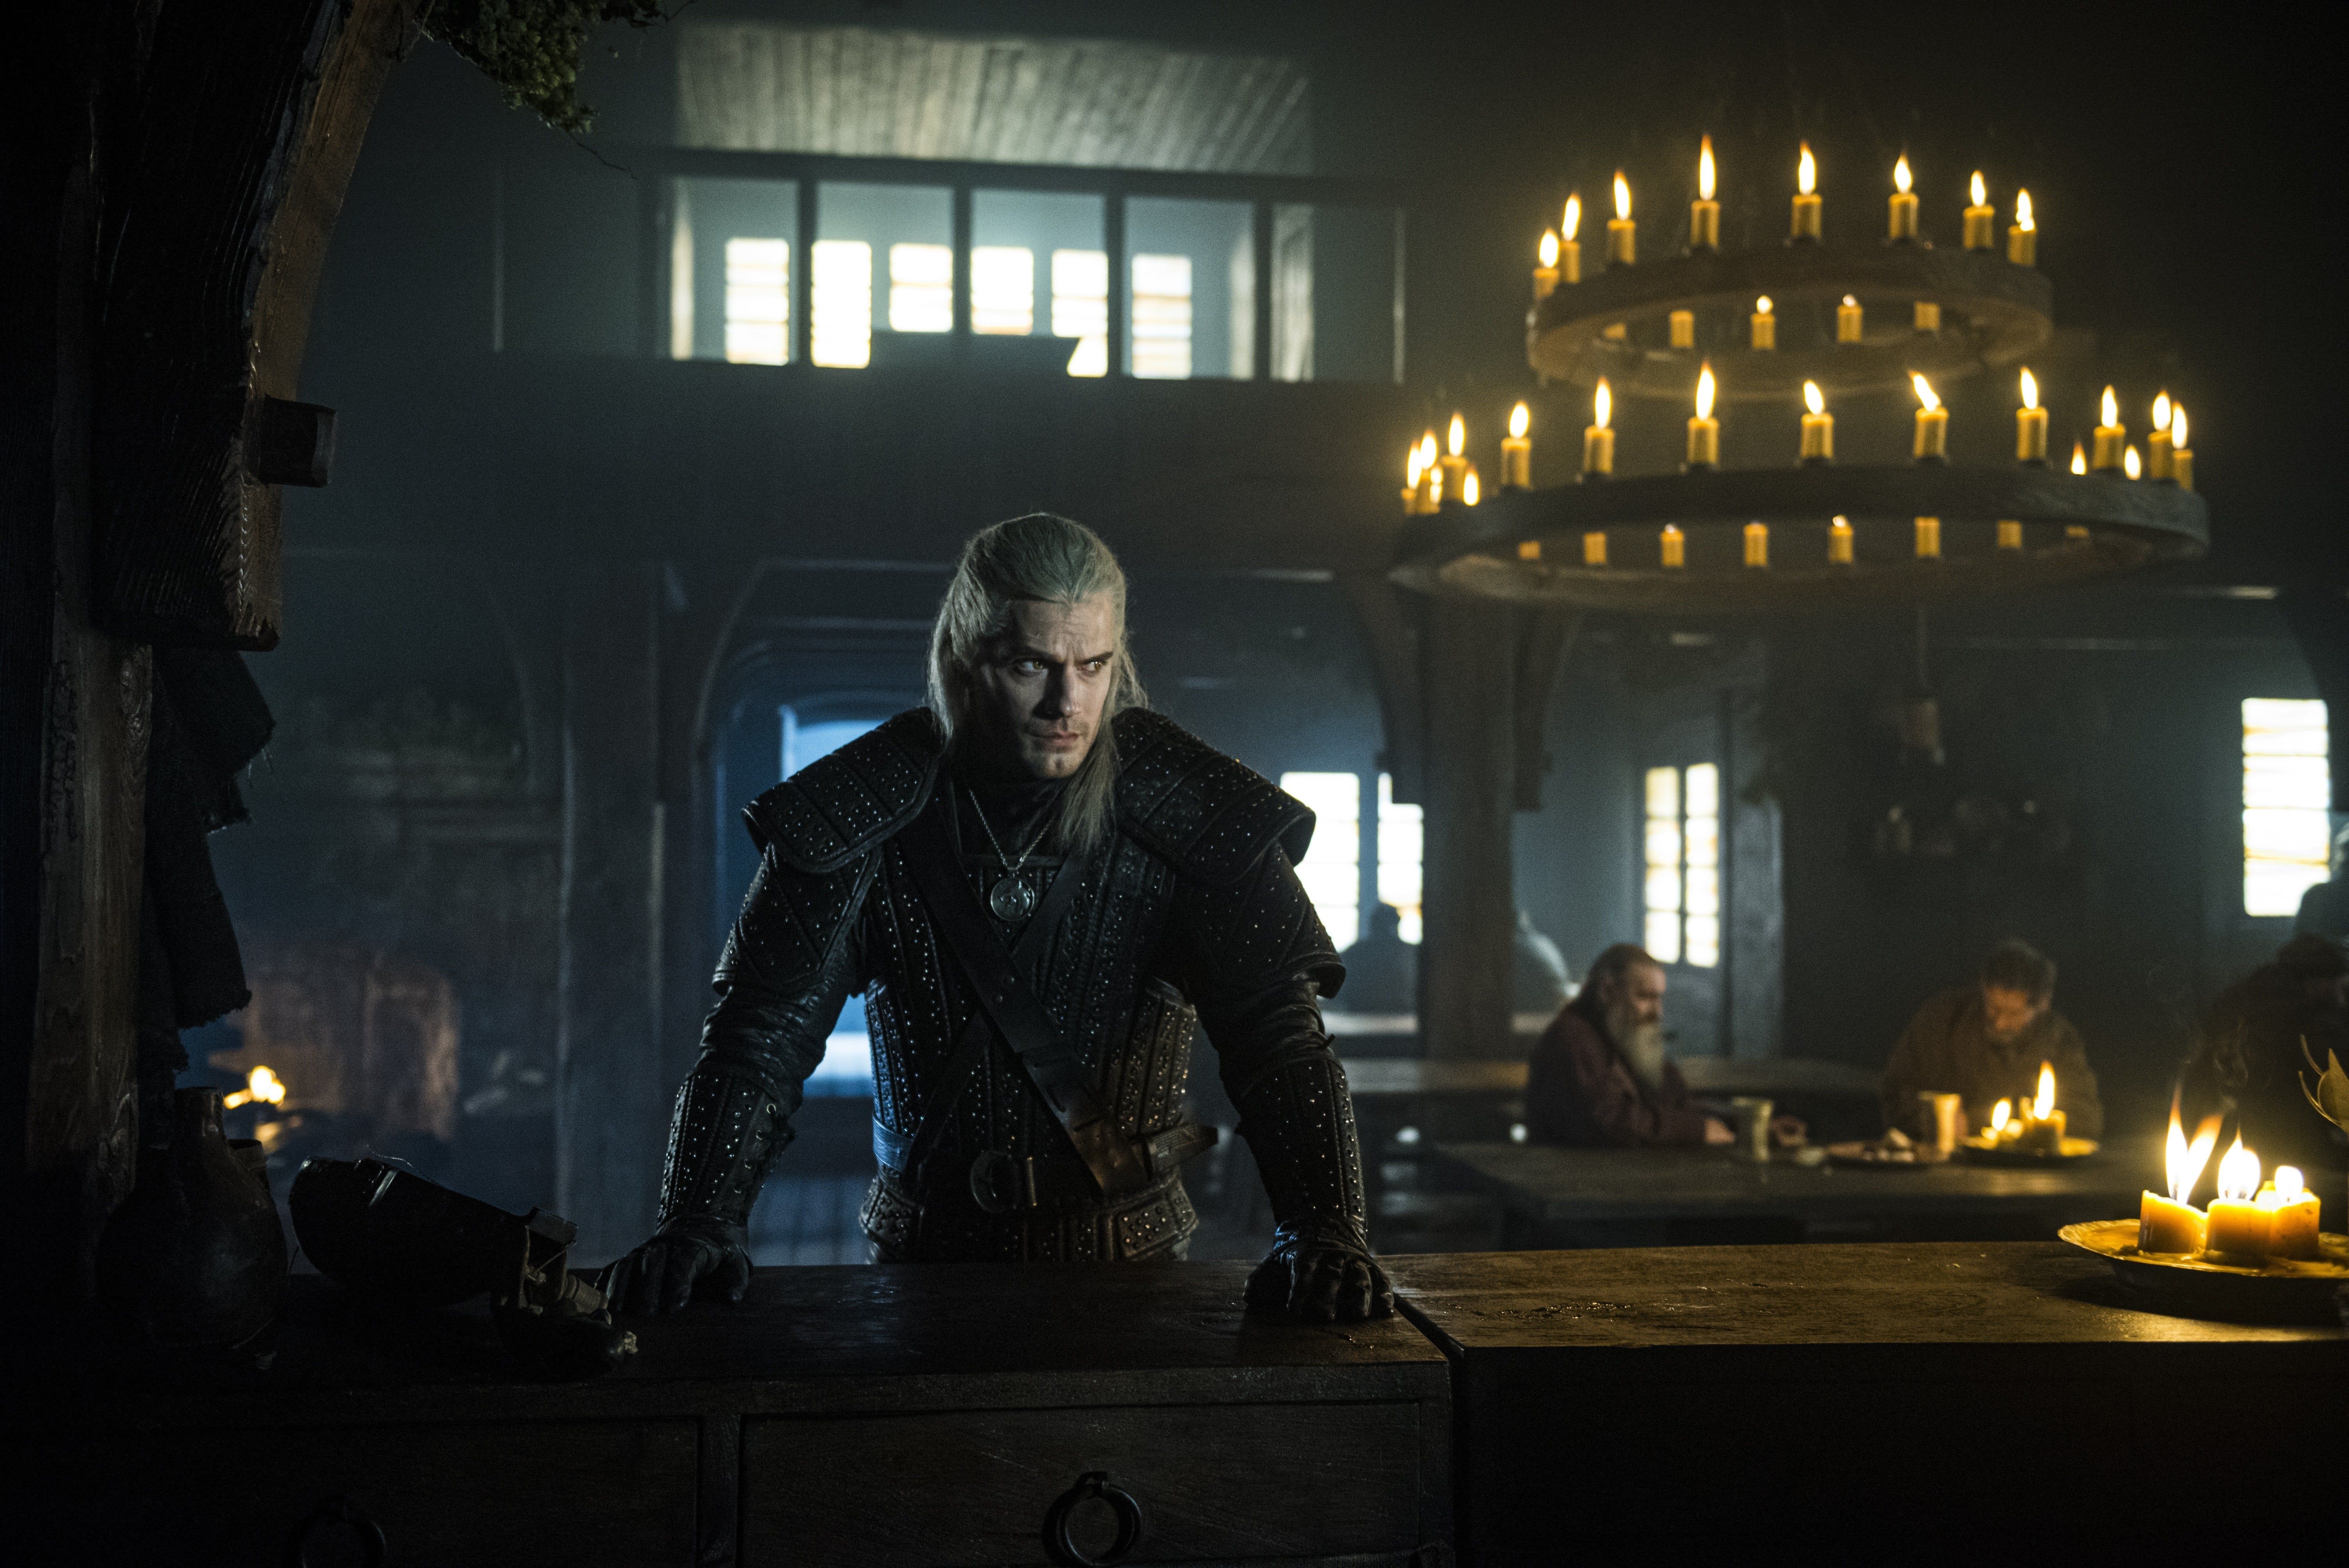 The Witcher Season 1 Wallpaper, HD TV Series 4K Wallpaper, Image, Photo and Background